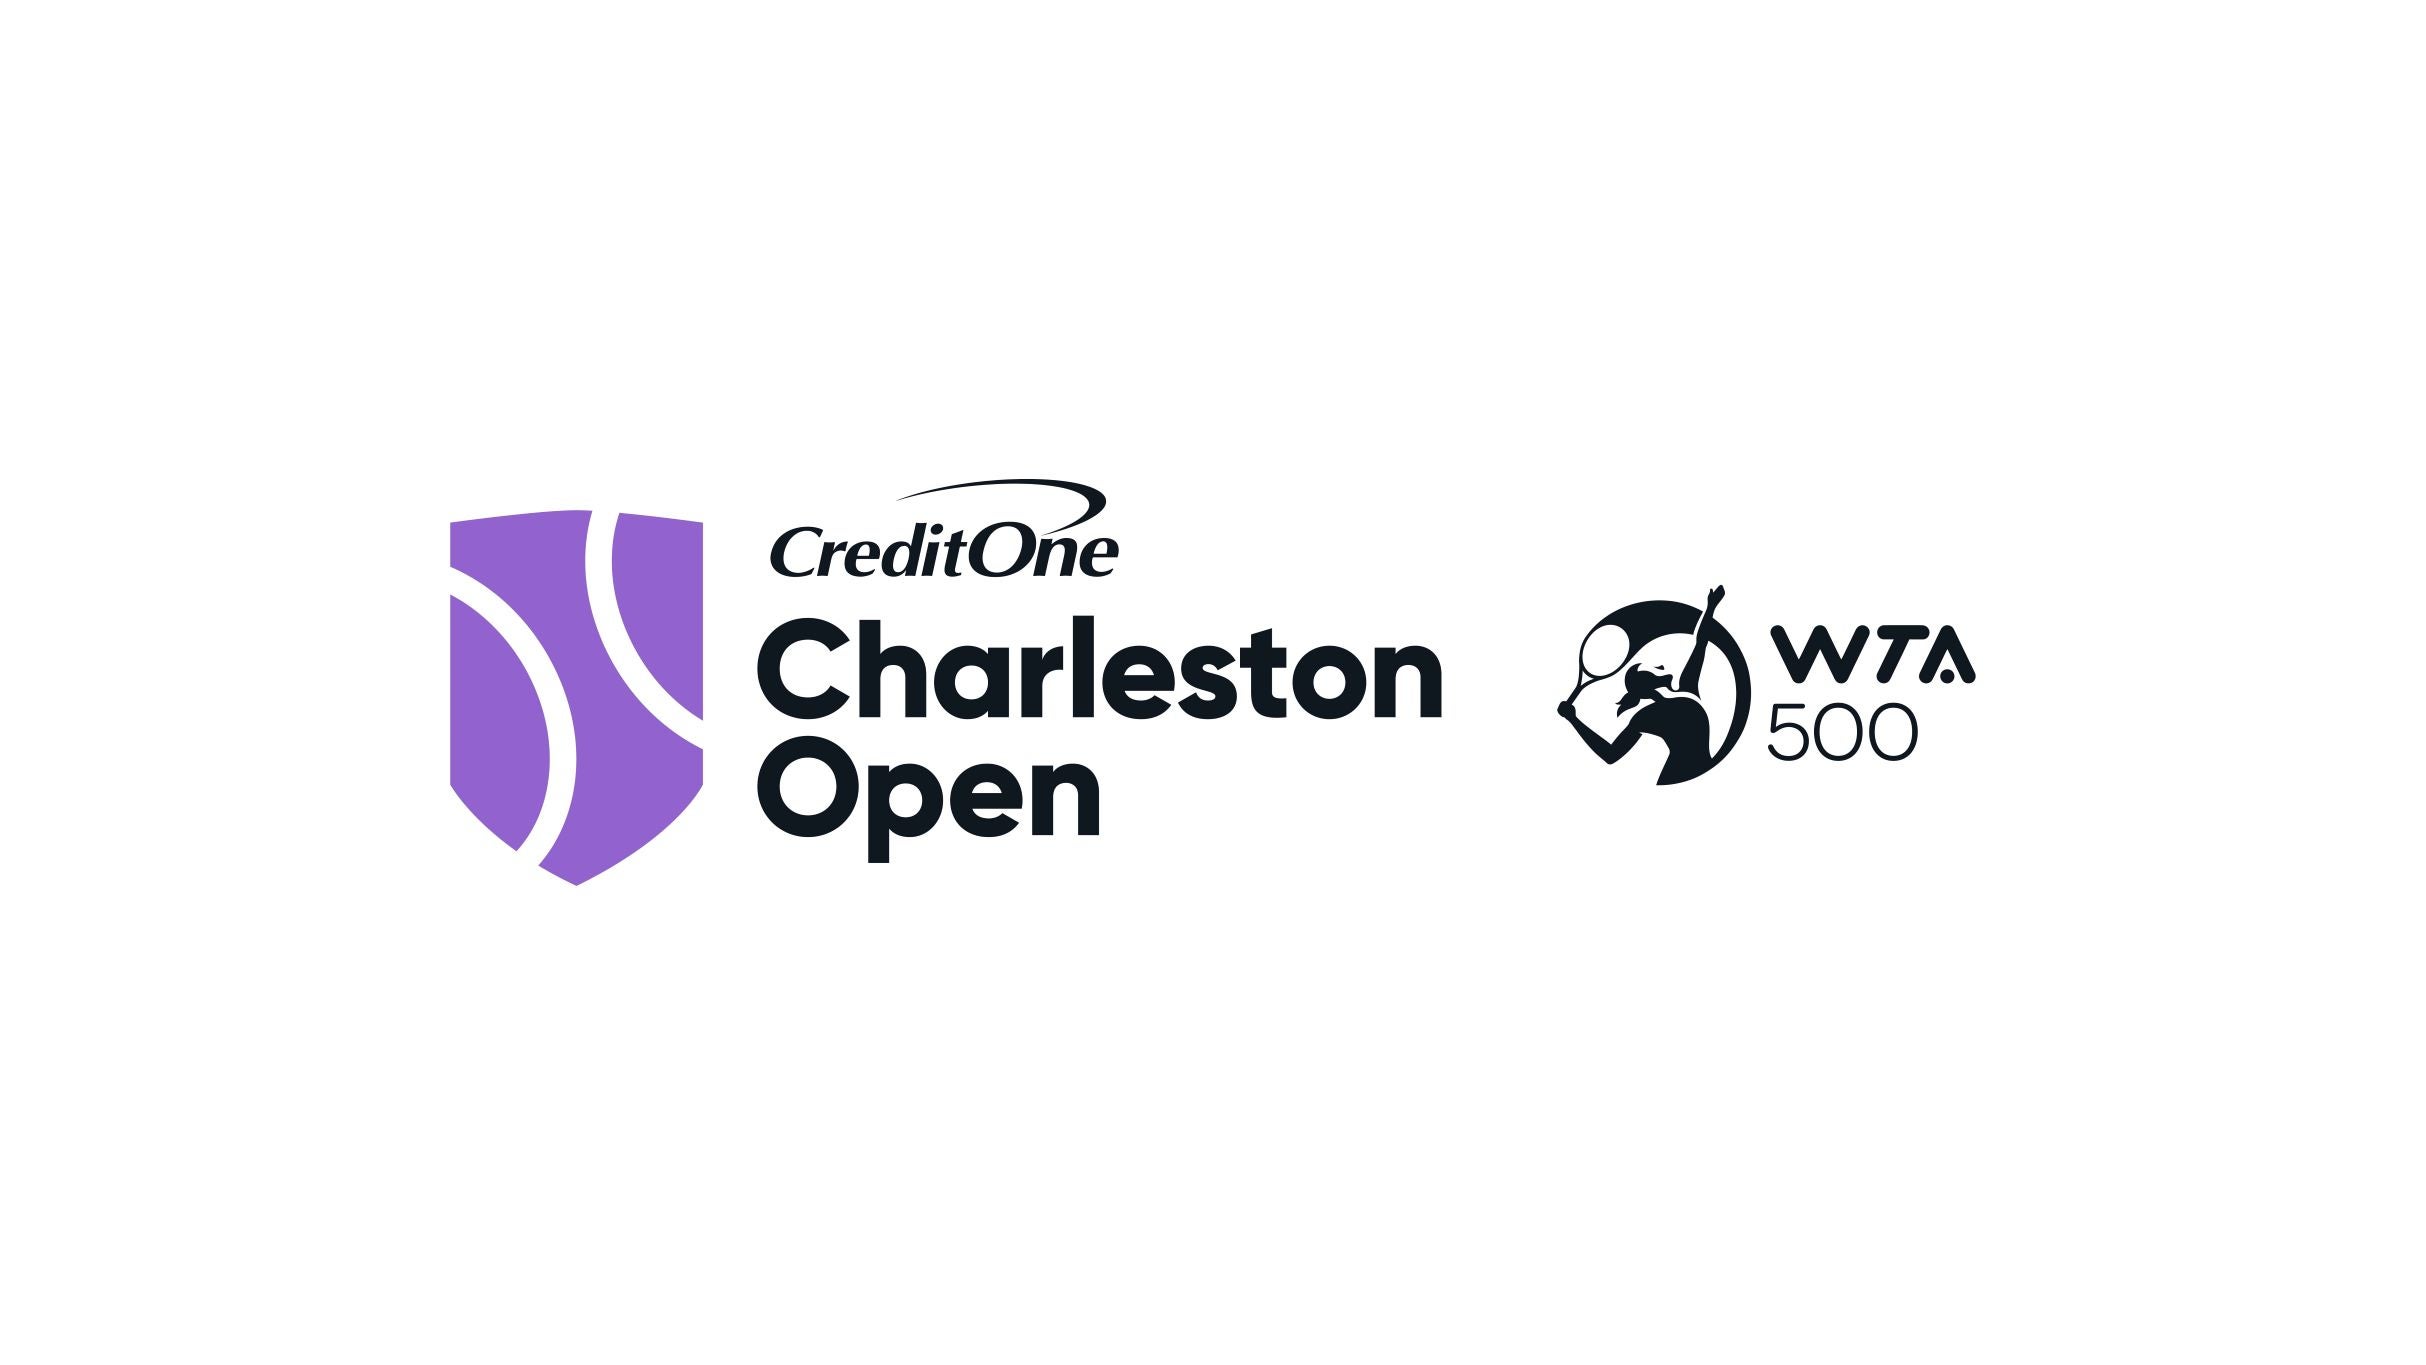 Credit One Charleston Open in Charleston promo photo for $5 Off presale offer code